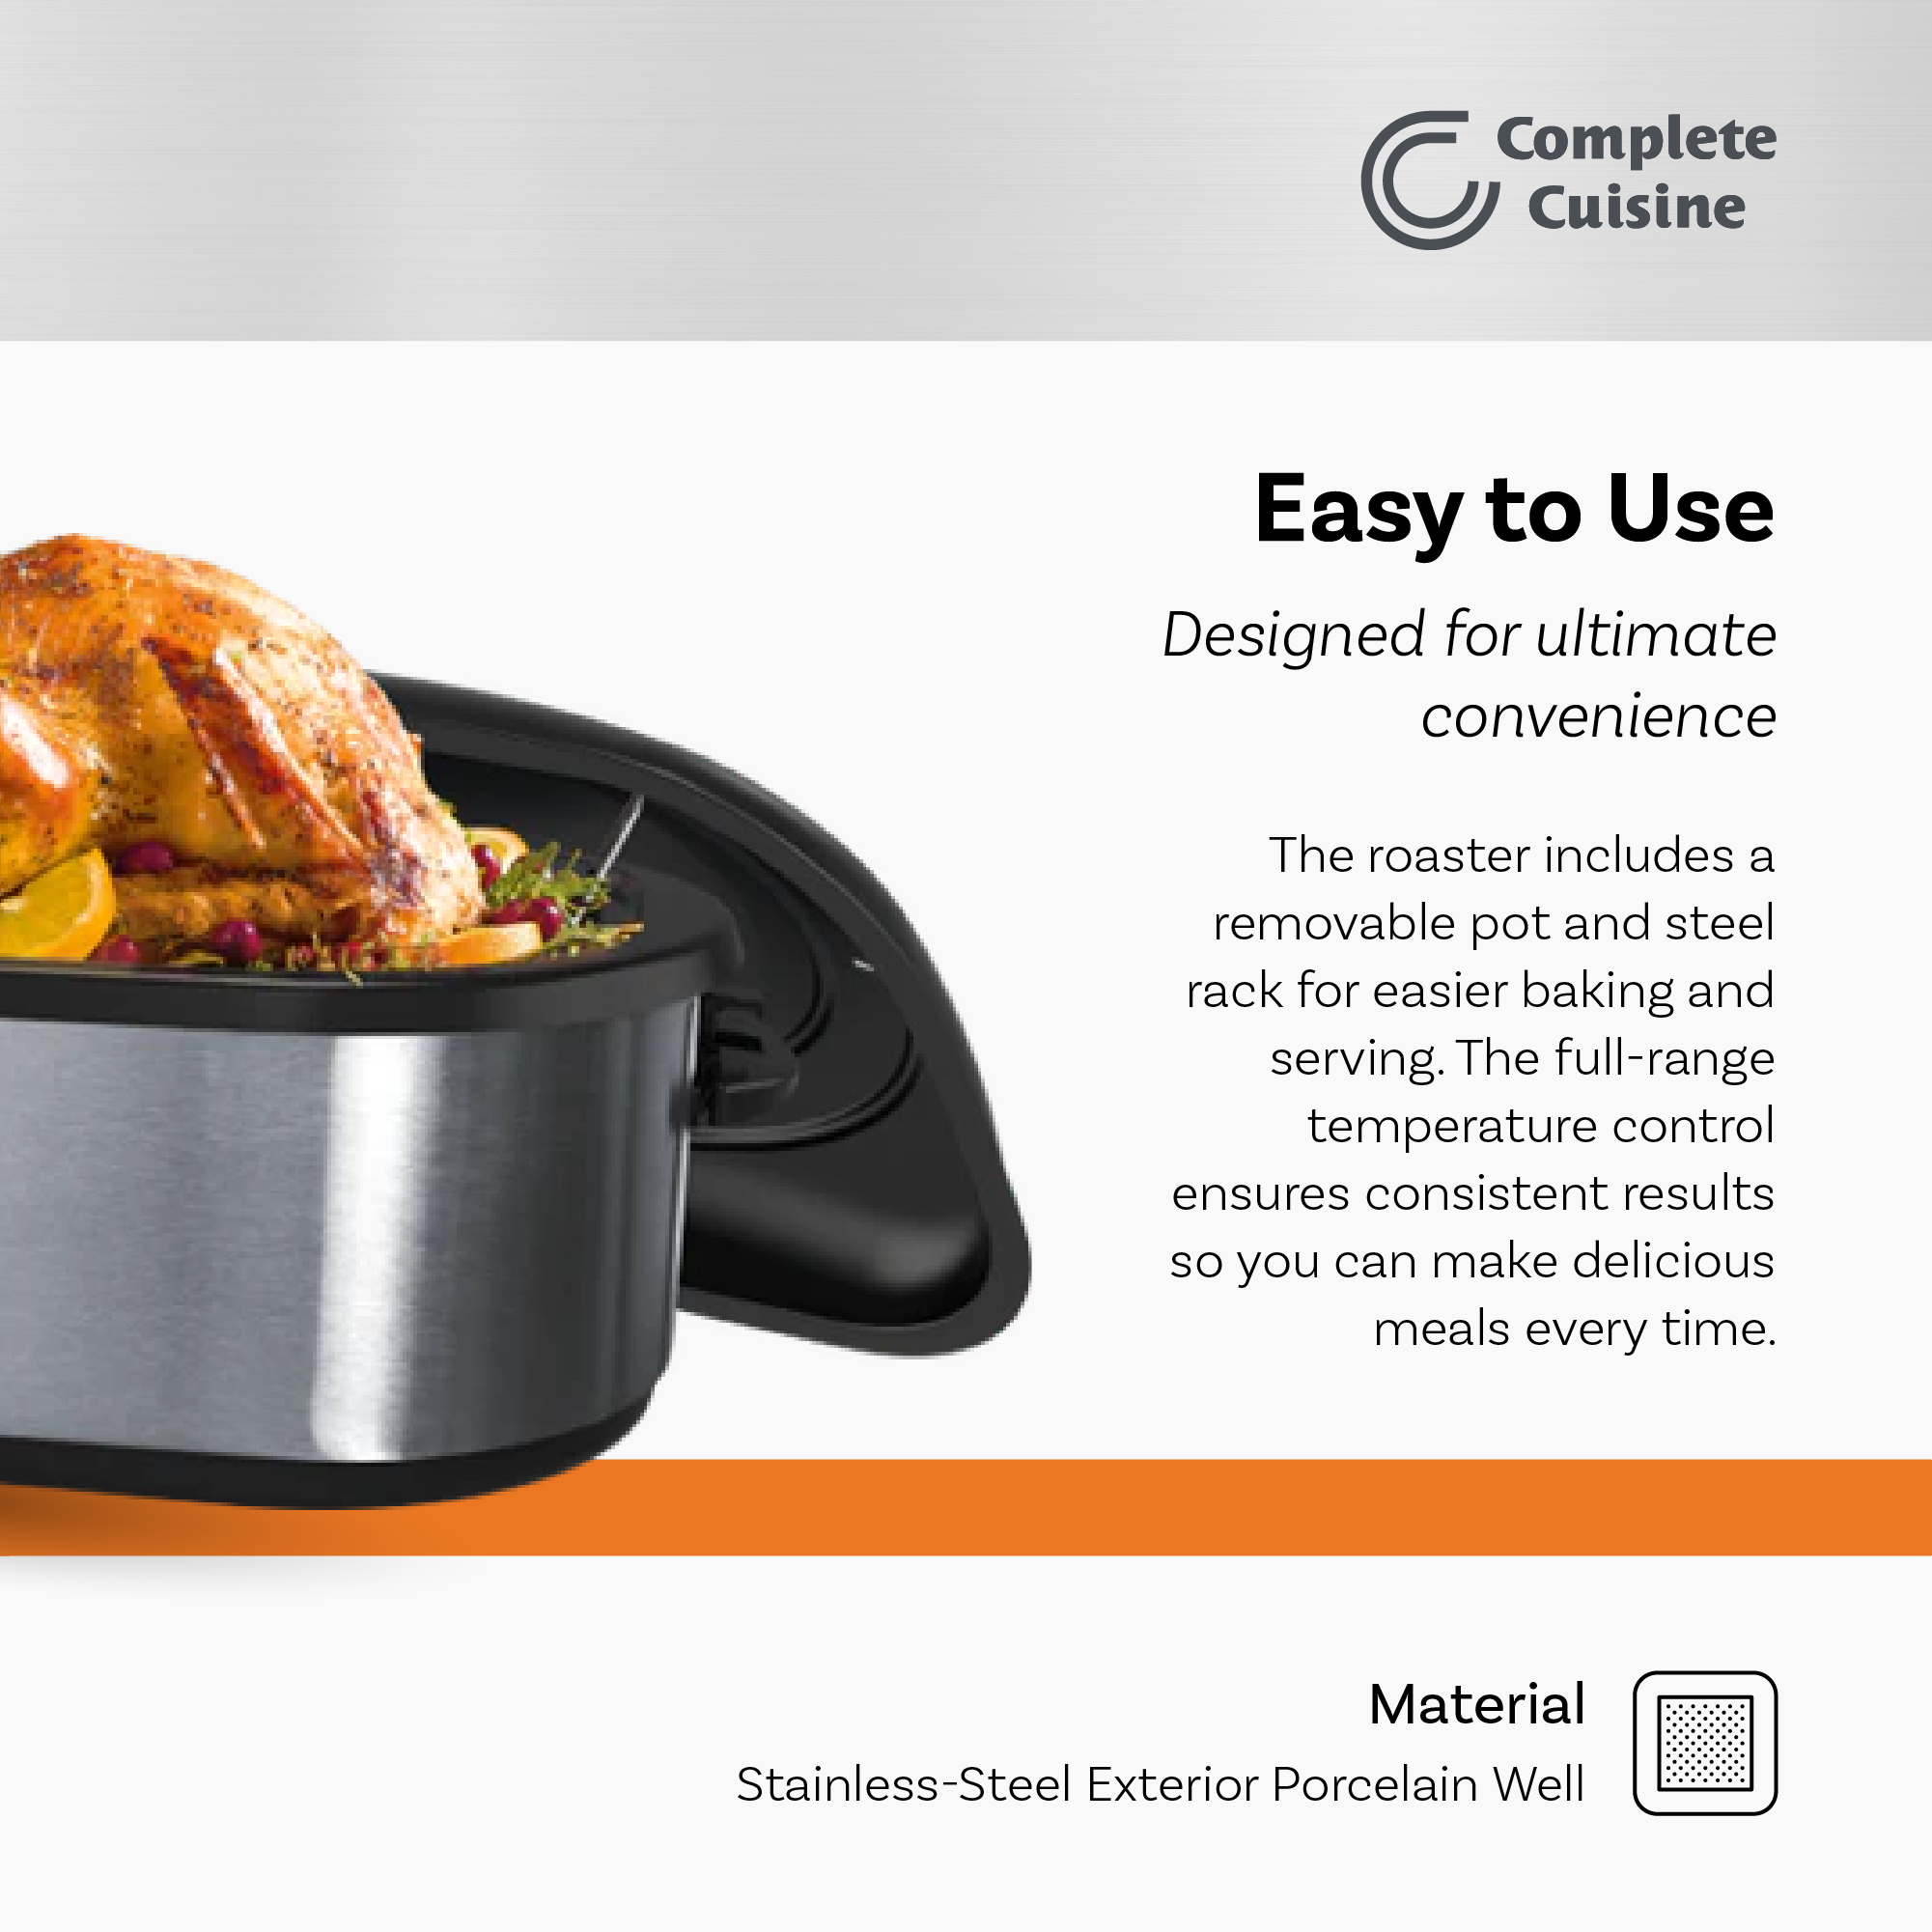 16 QT Roaster Oven With Self Basting Lid